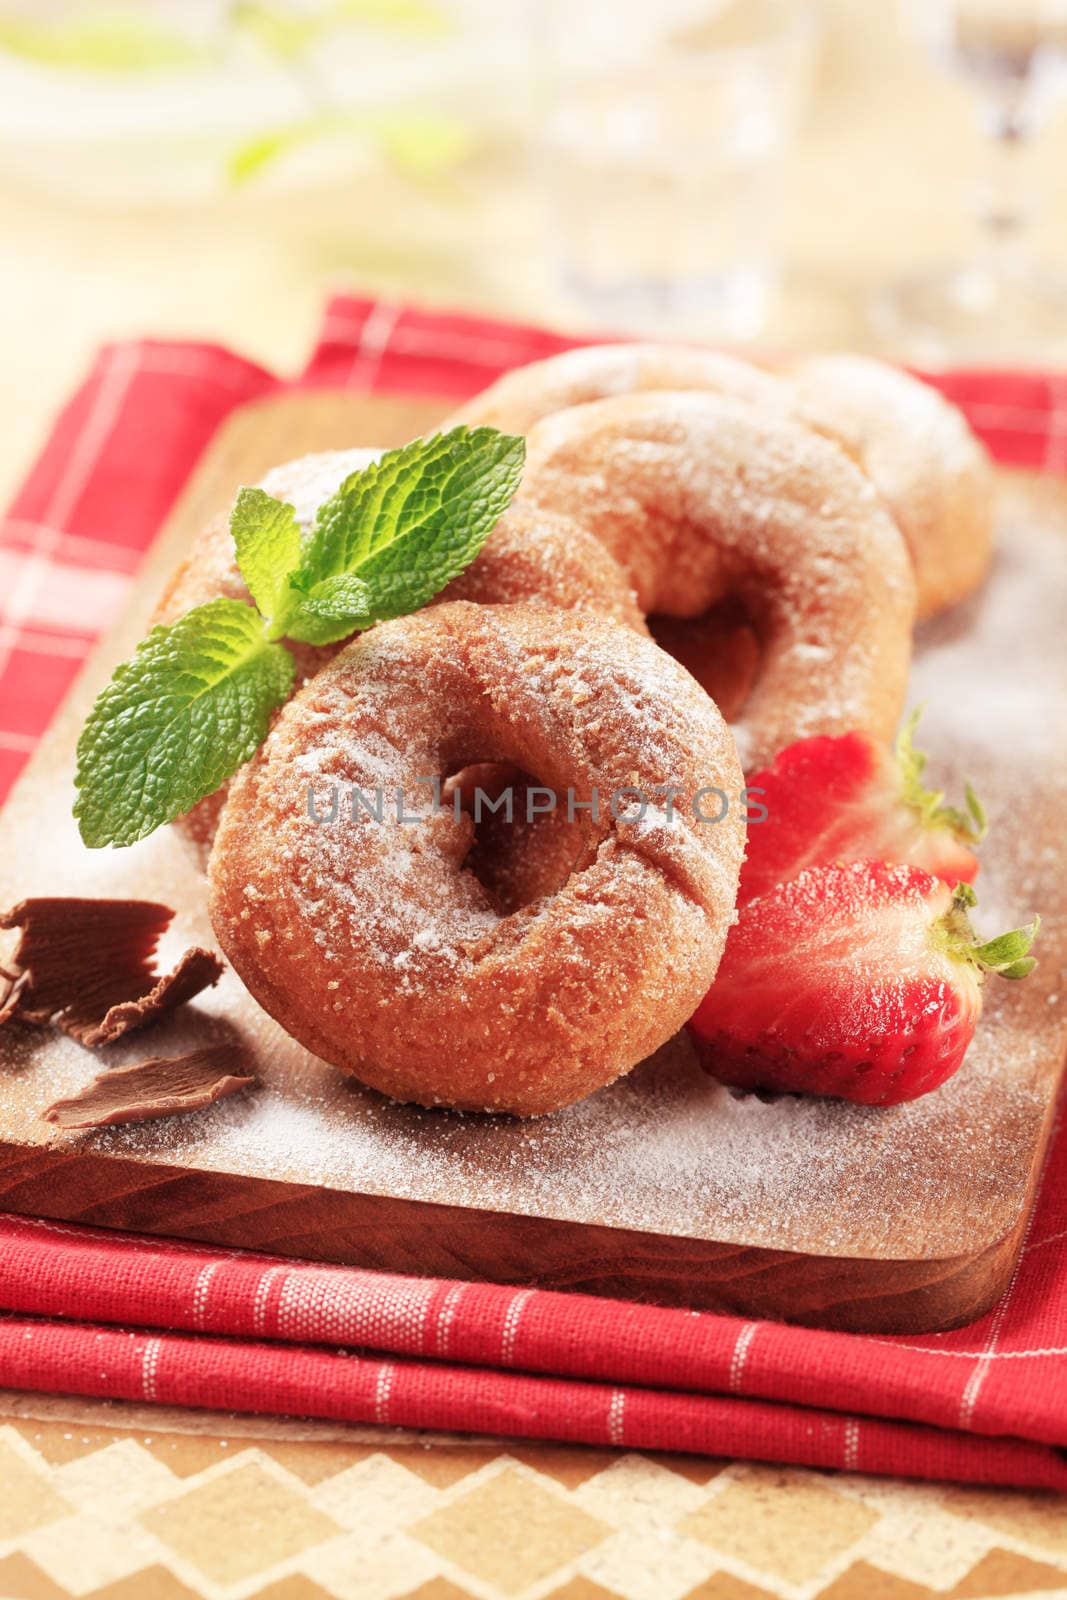 Ring doughnuts sprinkled with icing sugar - detail